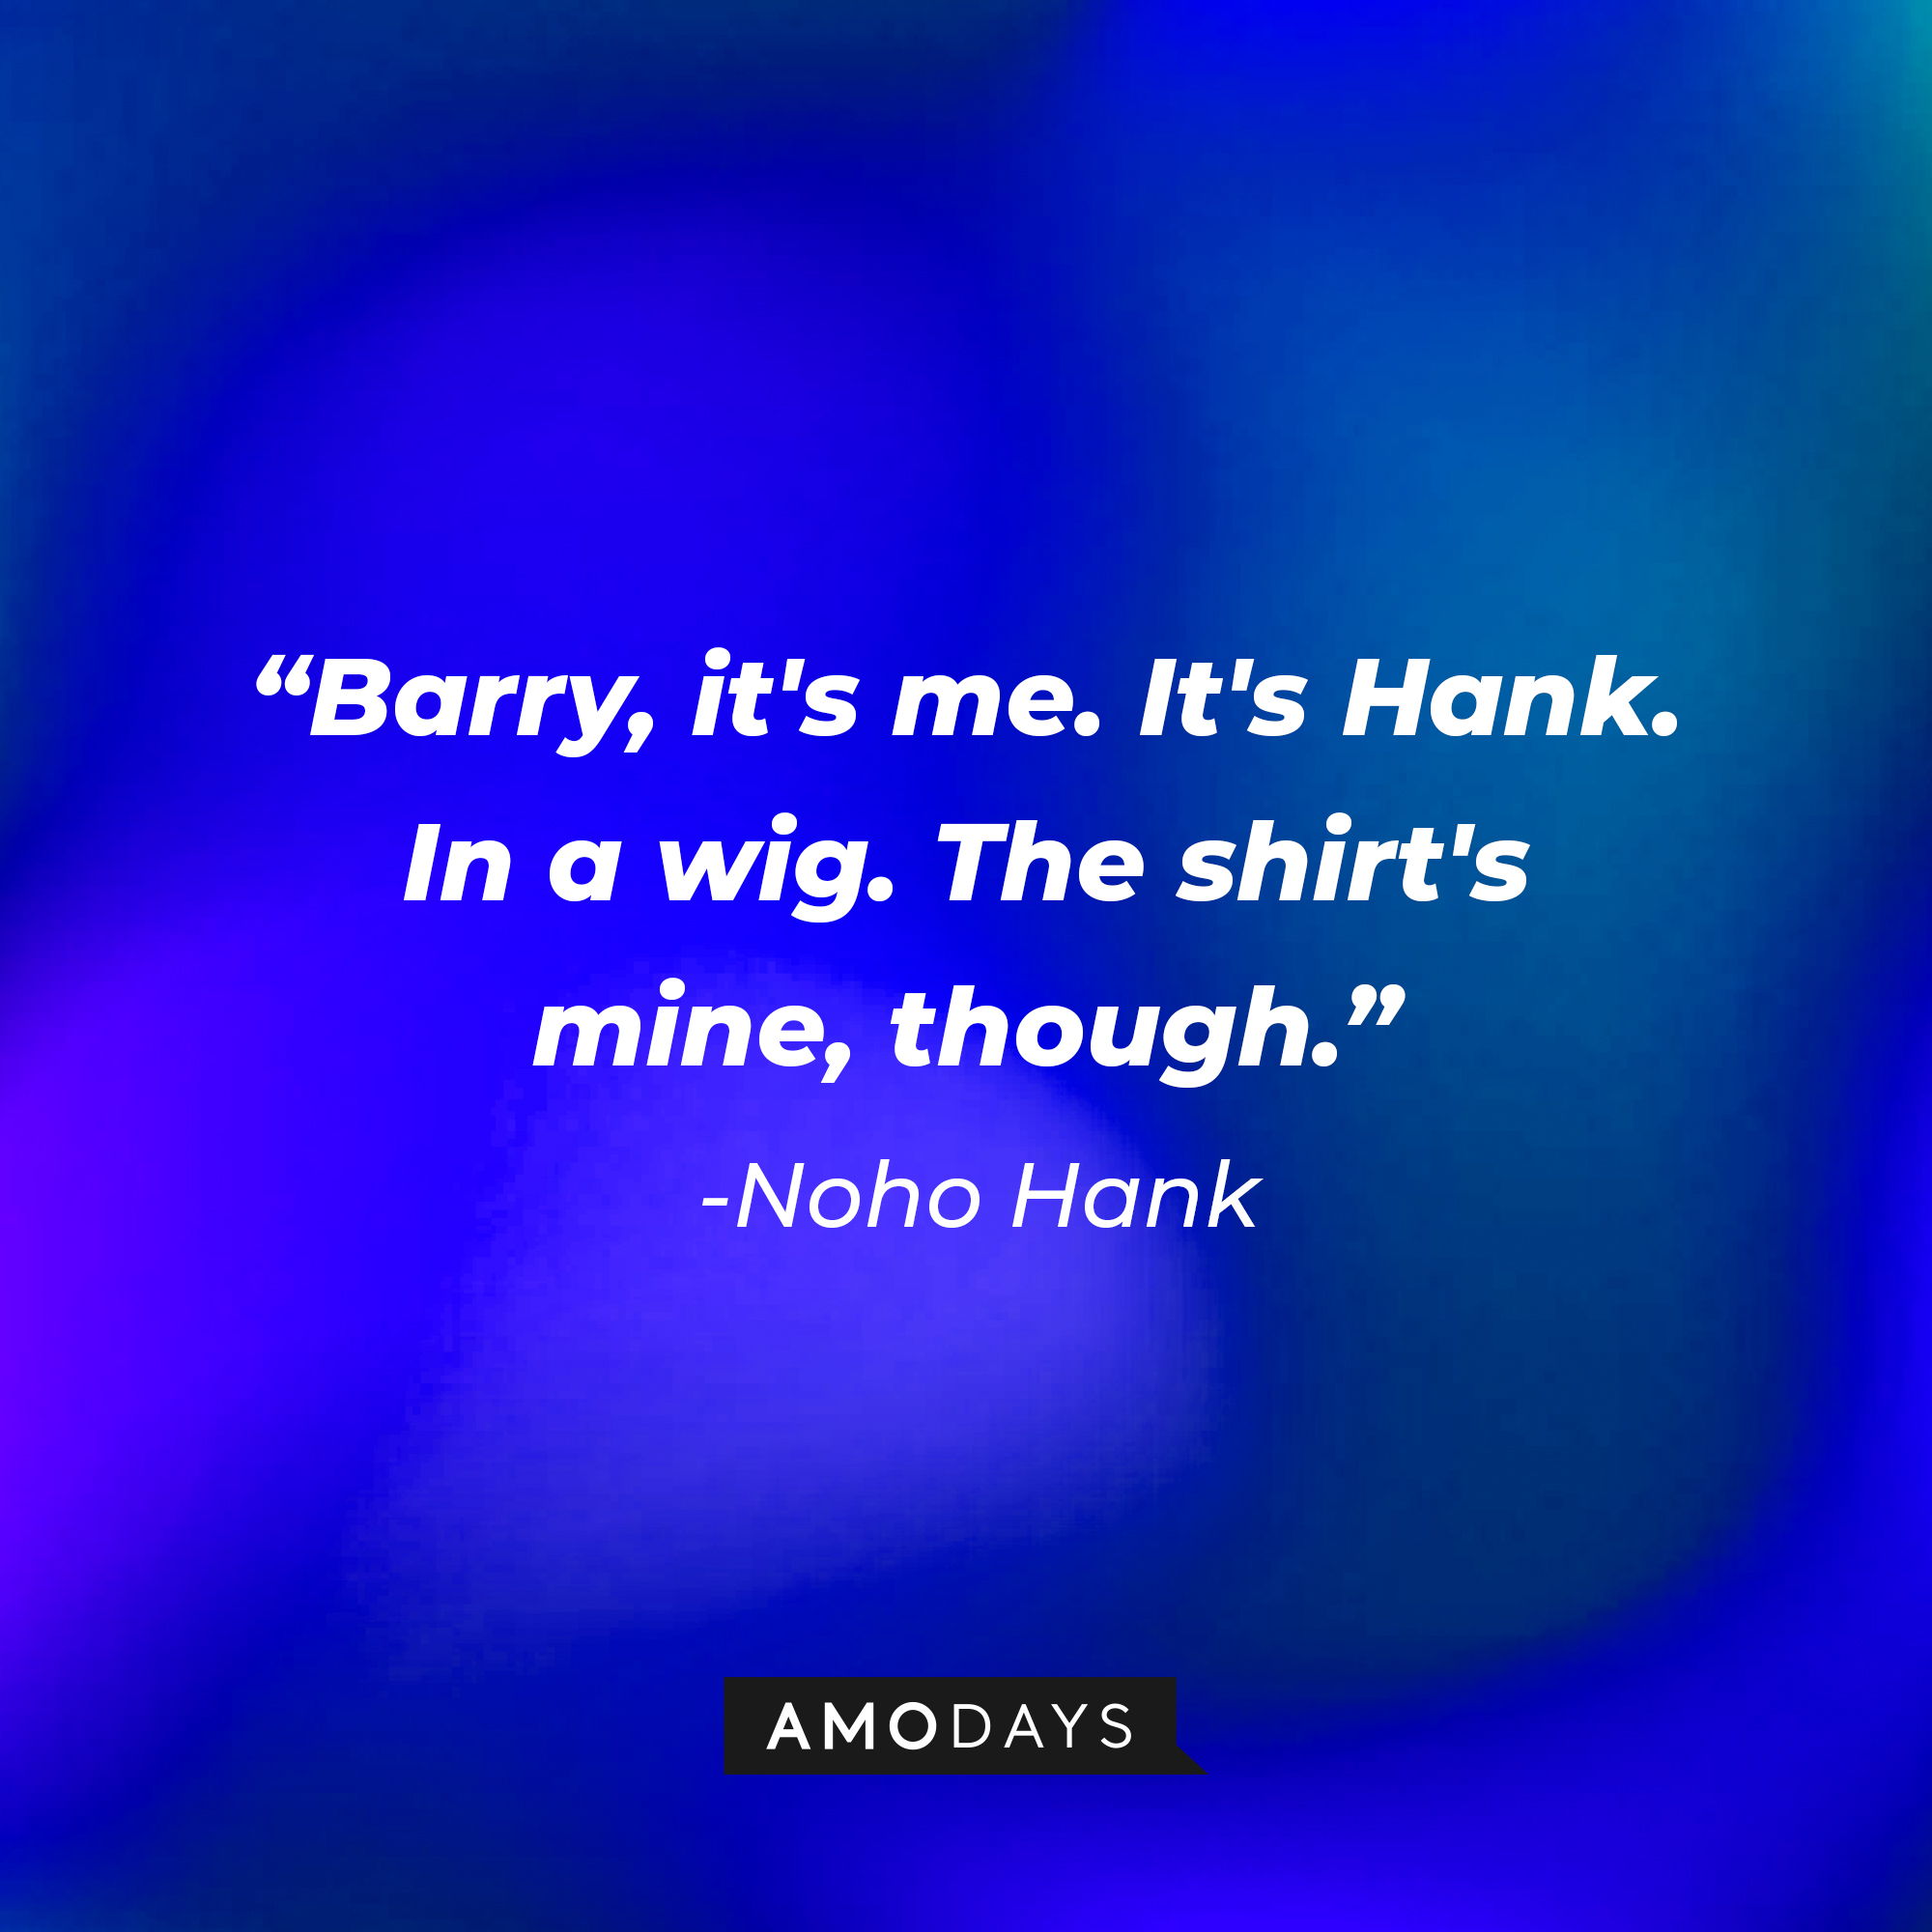 NoHo Hank, with his quote: "Barry, it's me. It's Hank. In a wig. The shirt's mine, though." | Source: AmoDays